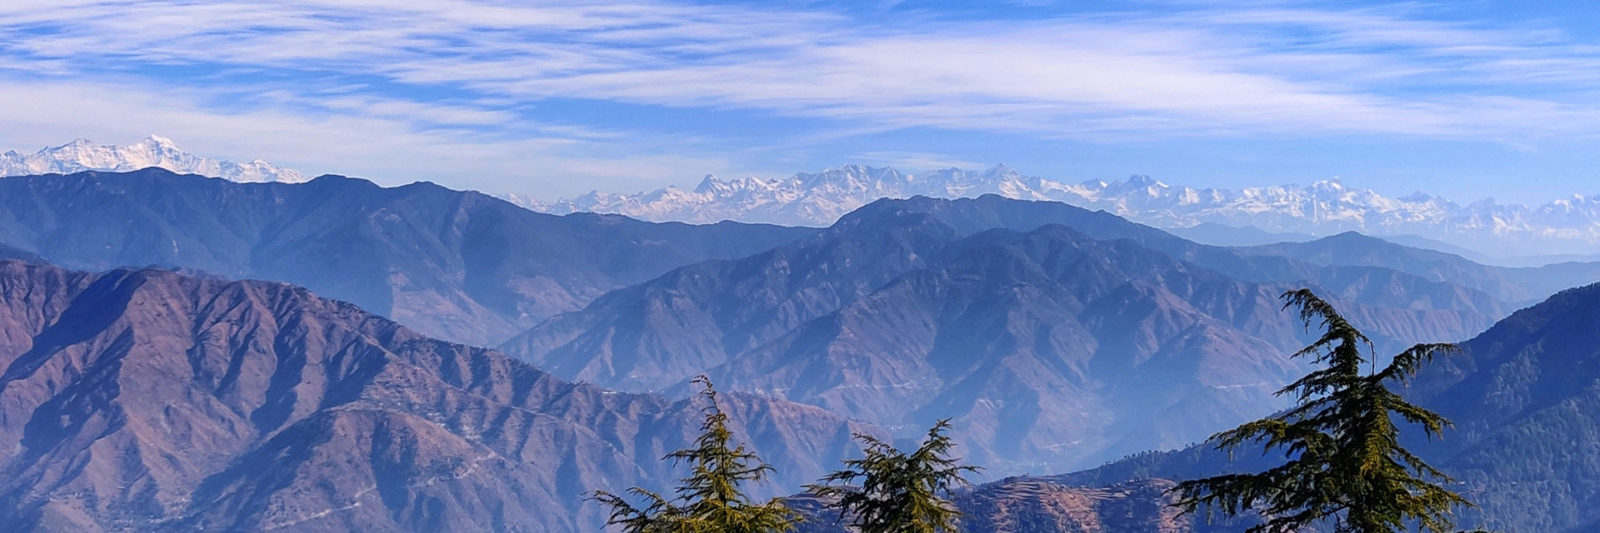 Lal Tibba, Mussoorie Photo - 0